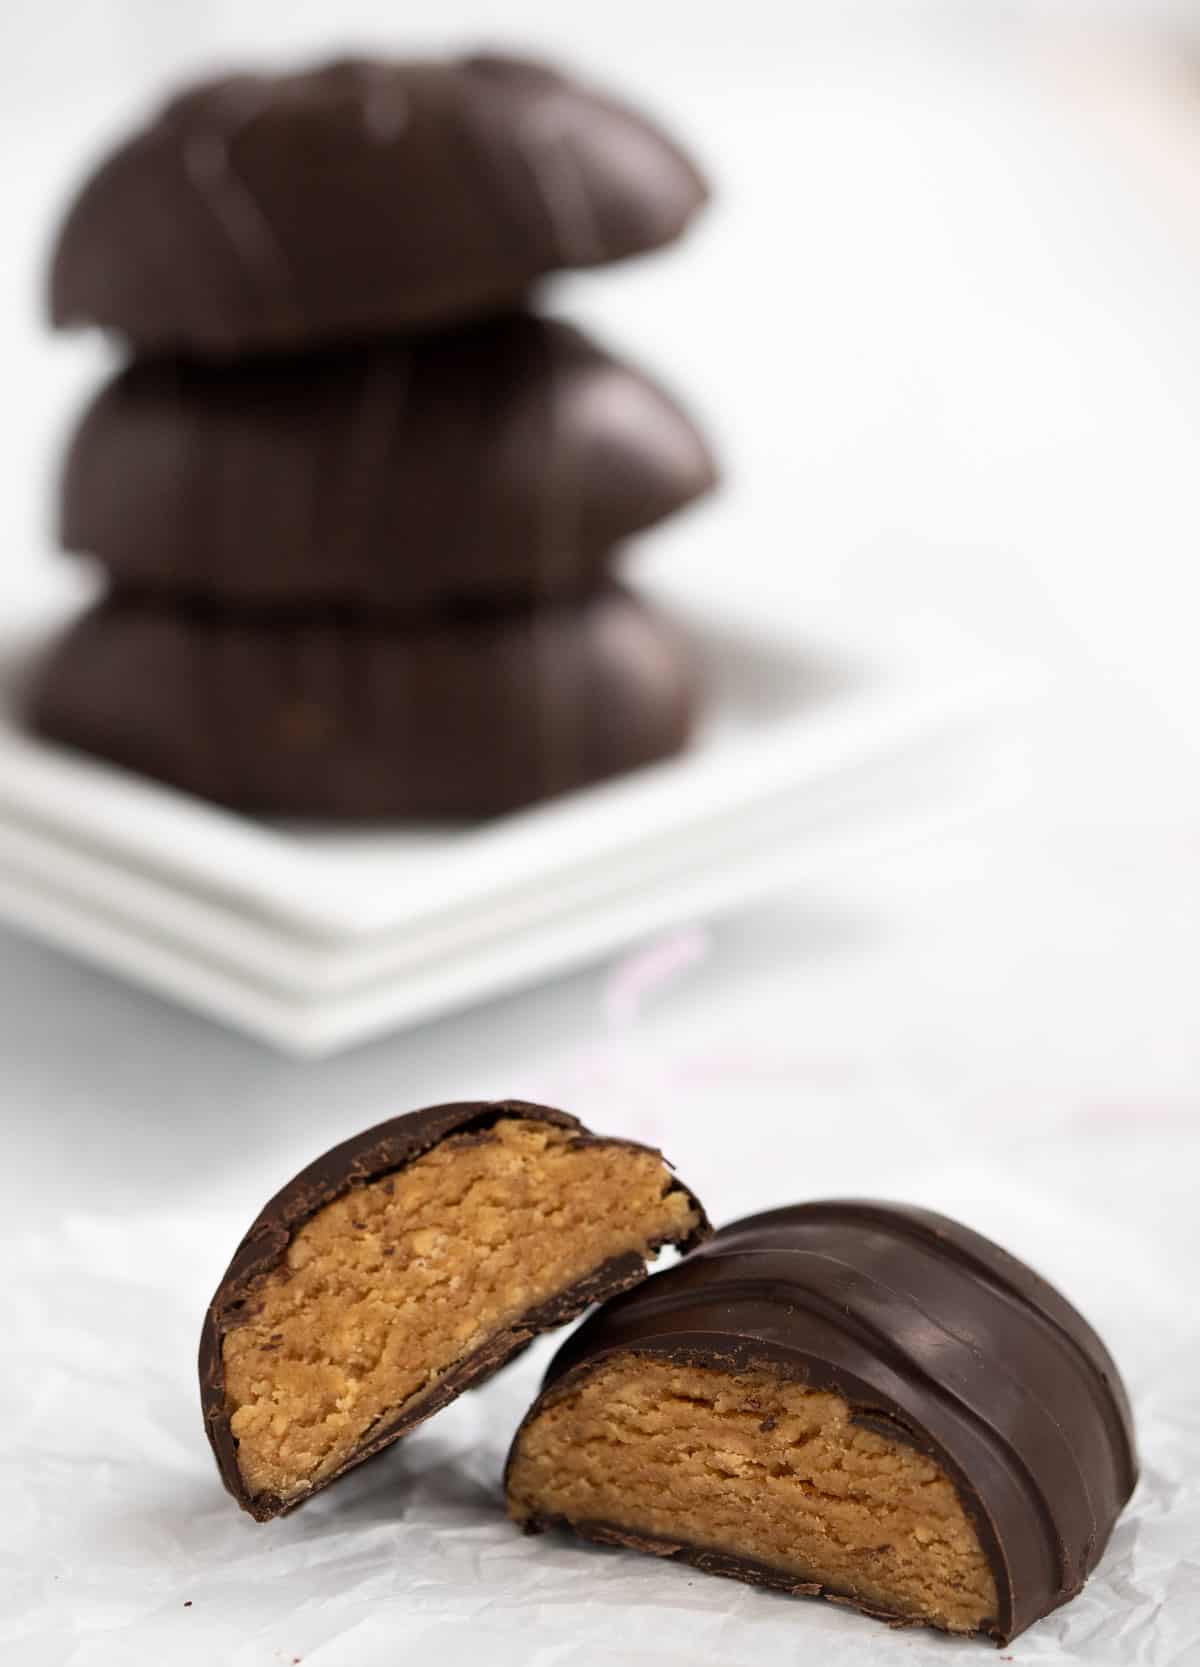 Chocolate peanut butter egg cut in half, with stack of chocolate eggs in the background.